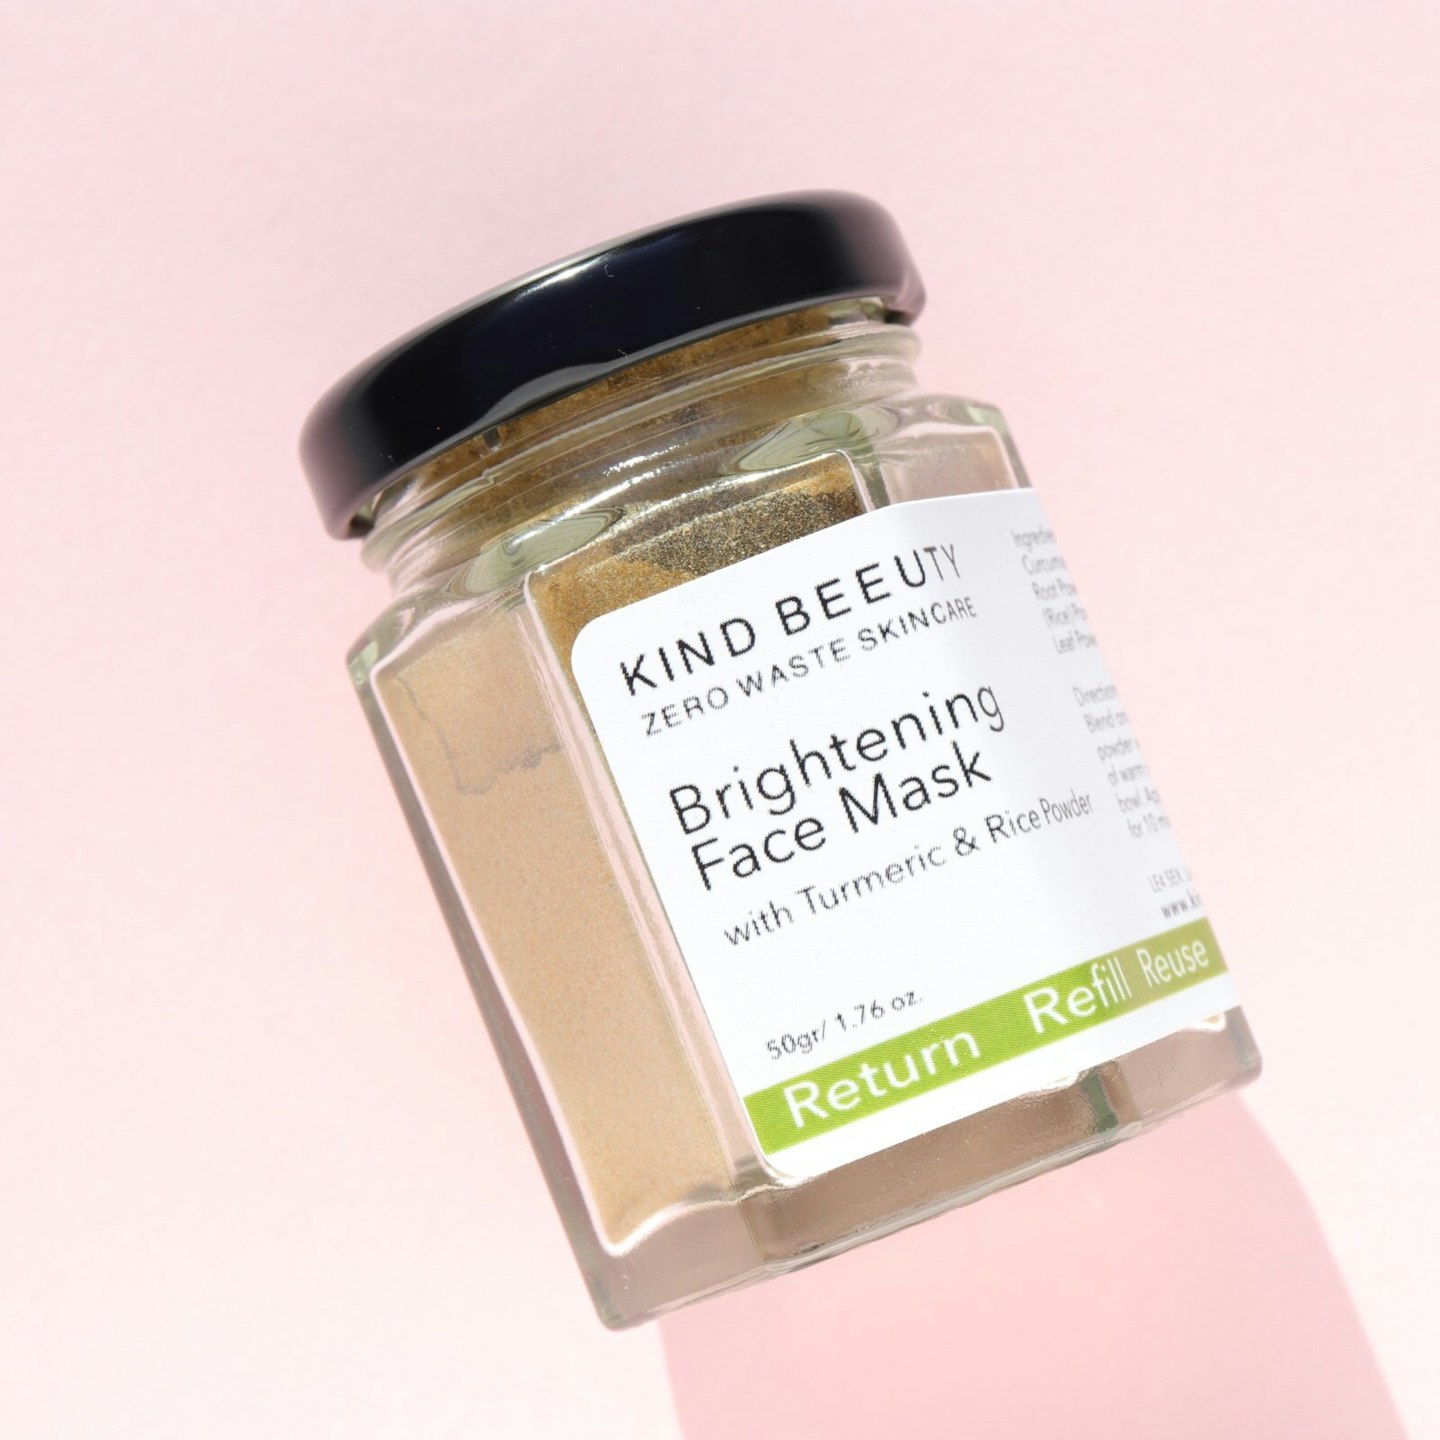 Kind Beeuty Brightening Face Mask